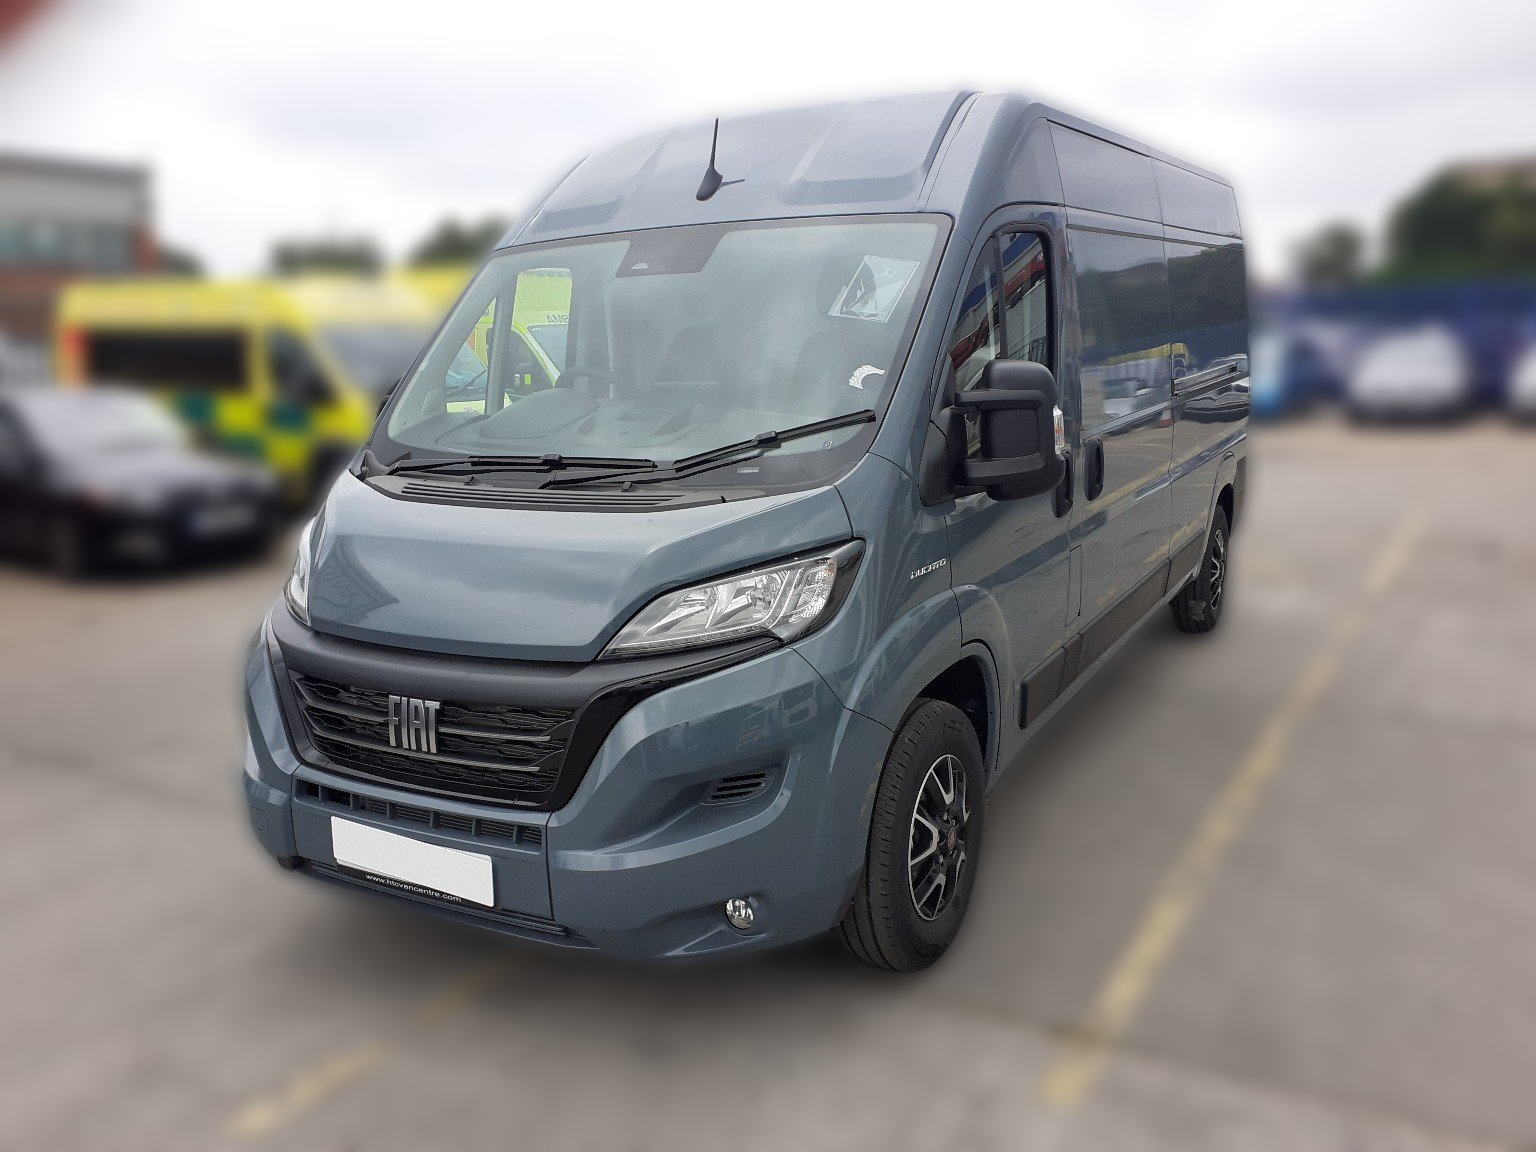 Fiat Ducato Review for lease deals